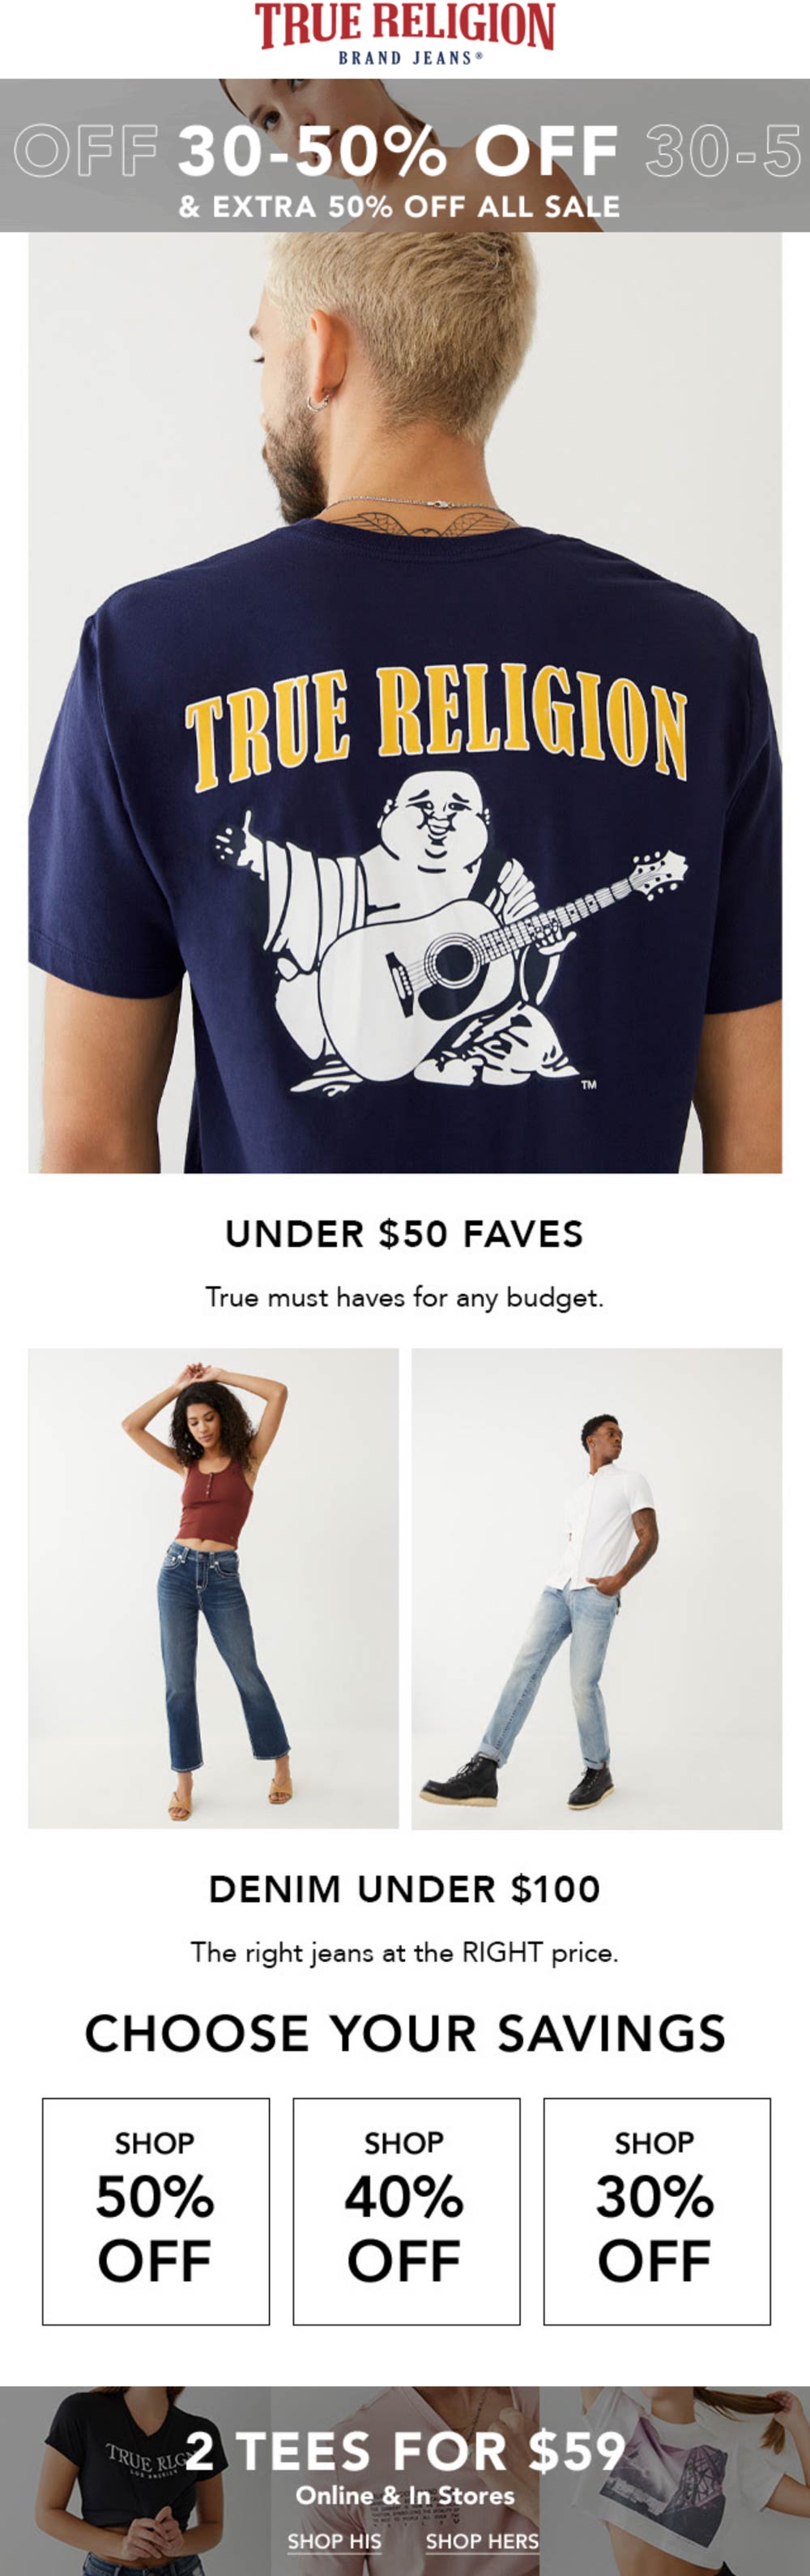 3050 off + extra 50 off all sale items at True Religion 